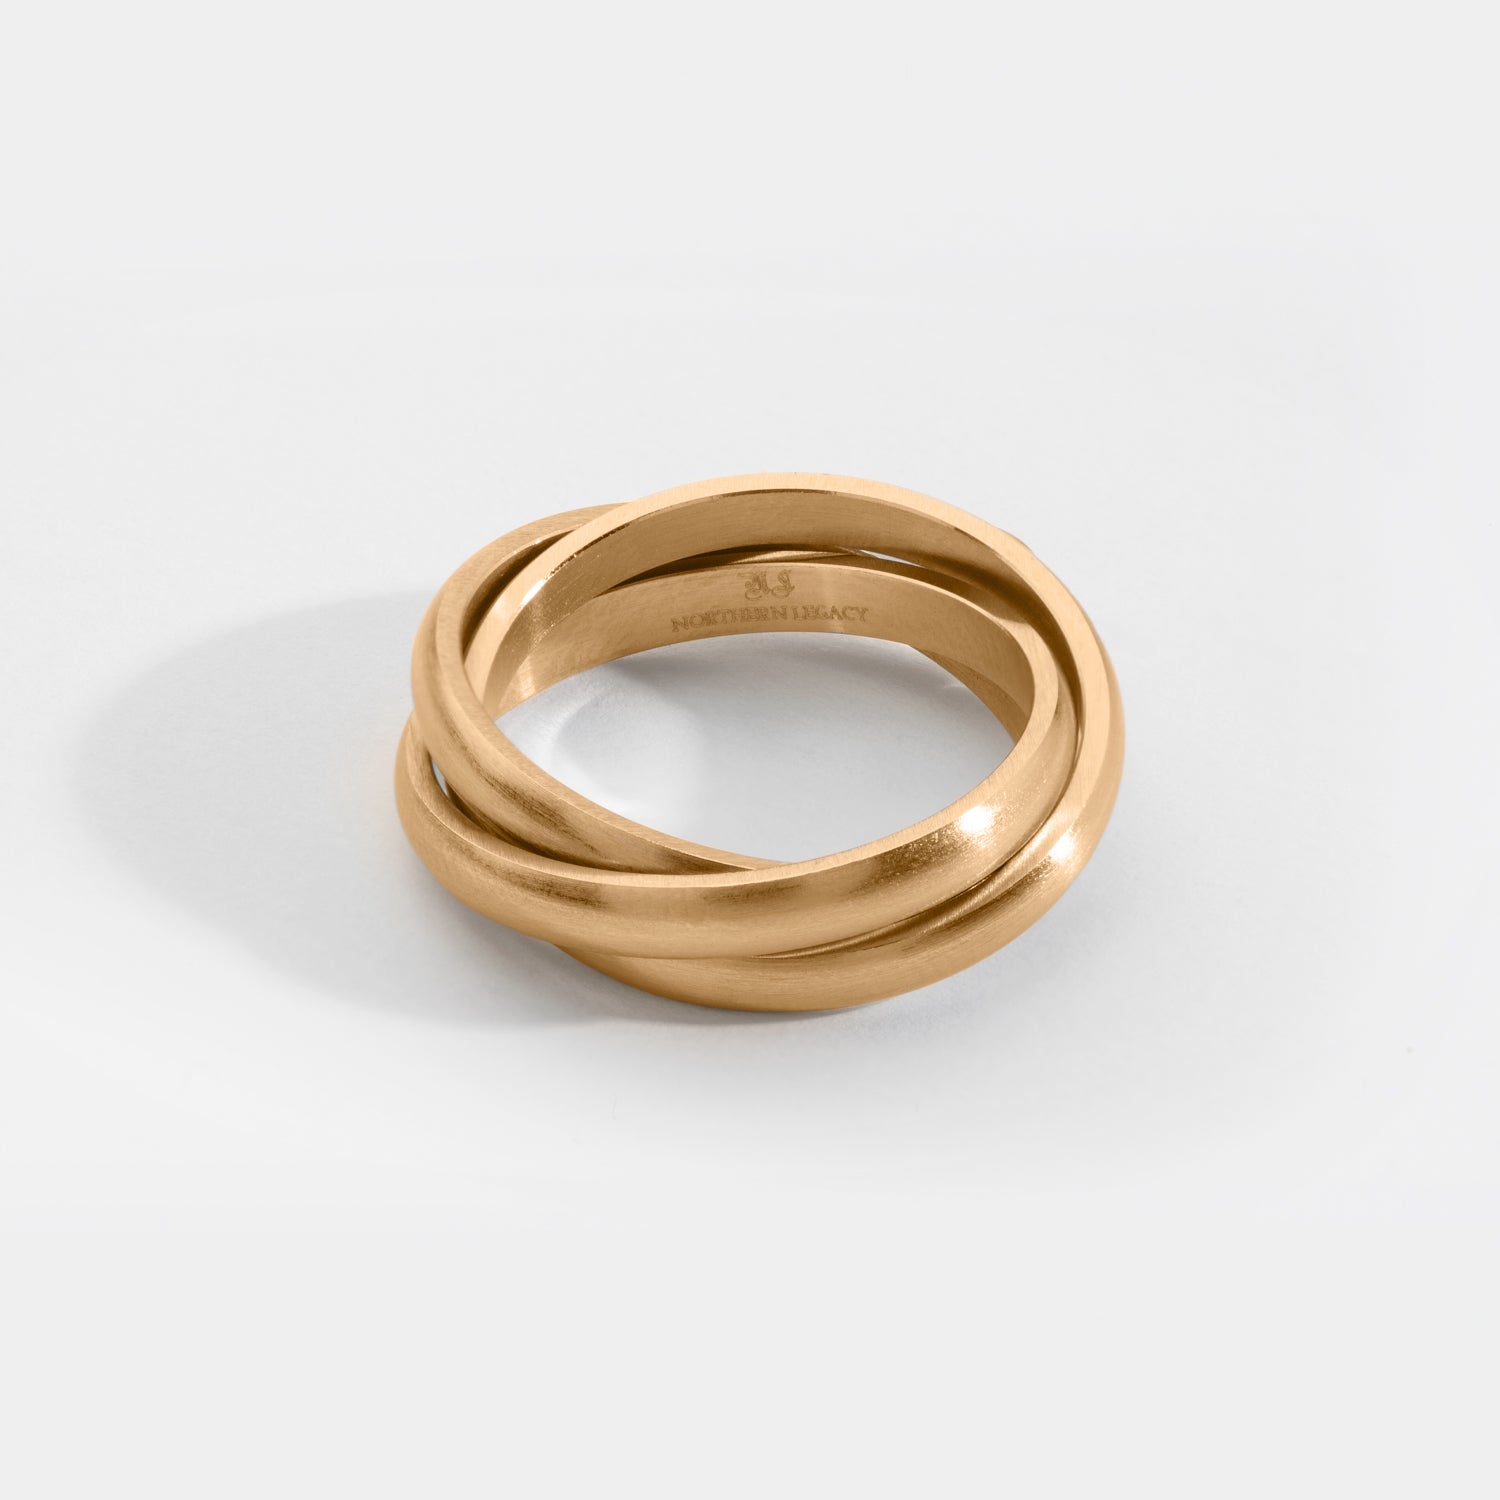 Helix band ring - Gold-toned